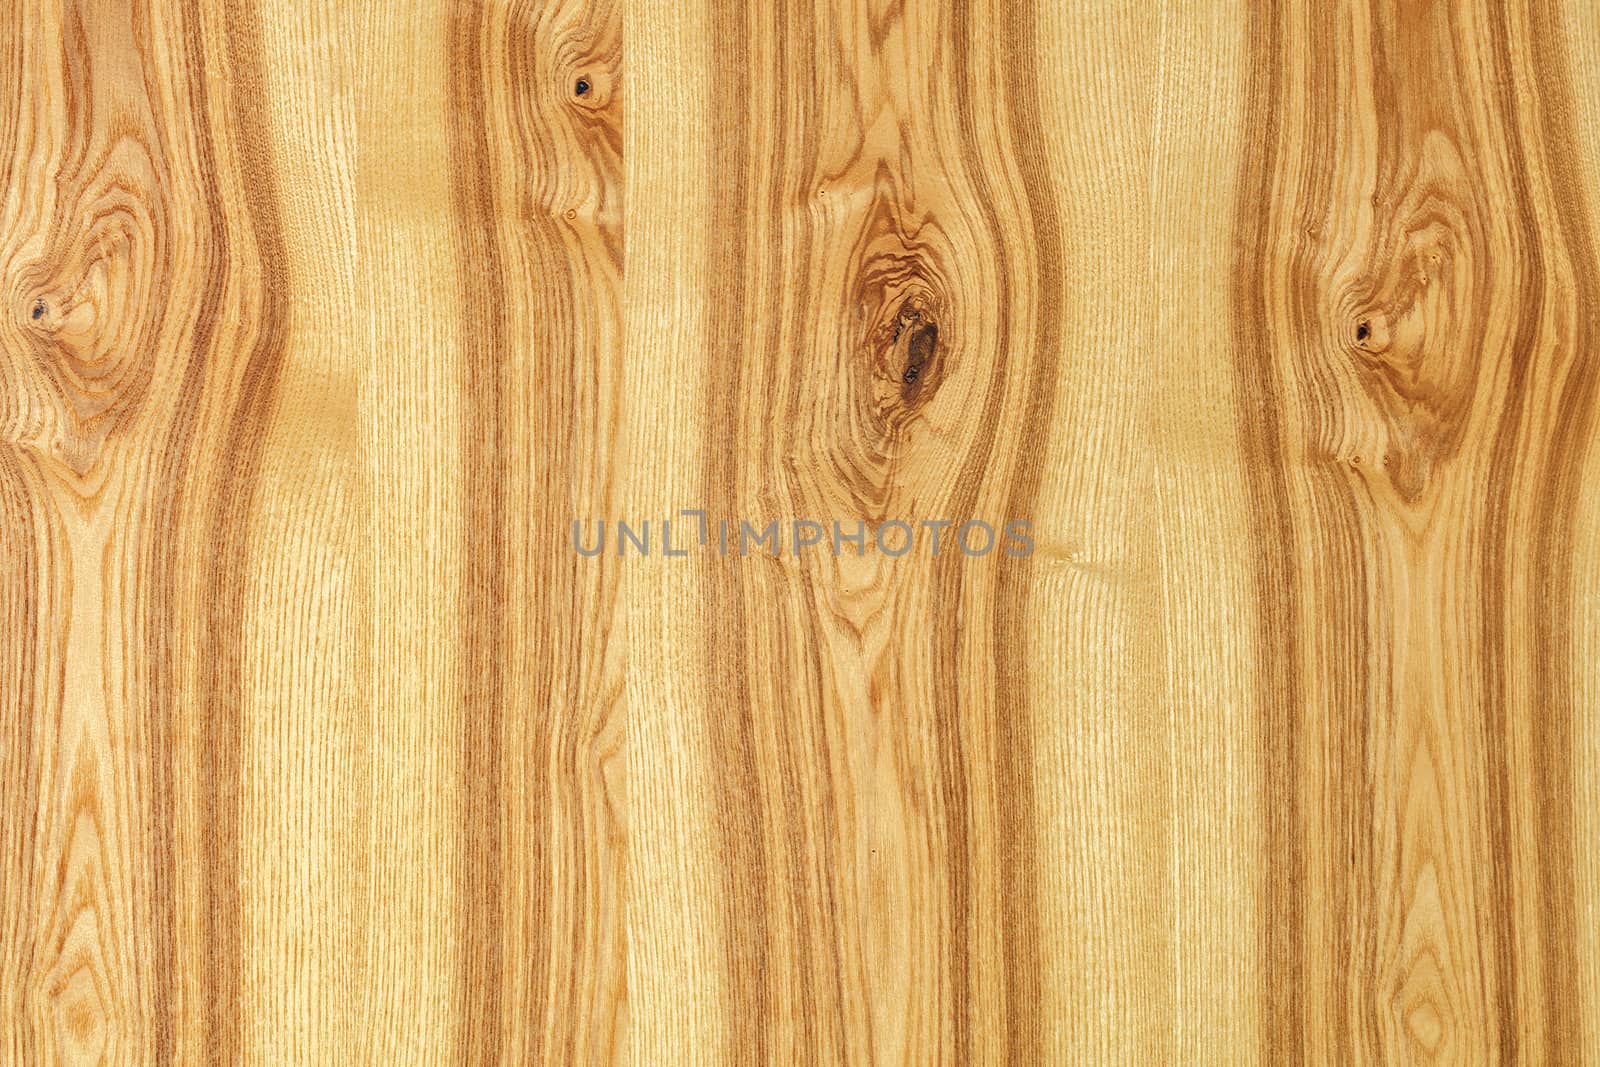 A beautiful pattern cut of a tree in the form of a new smooth wooden veneer with vertical guides.